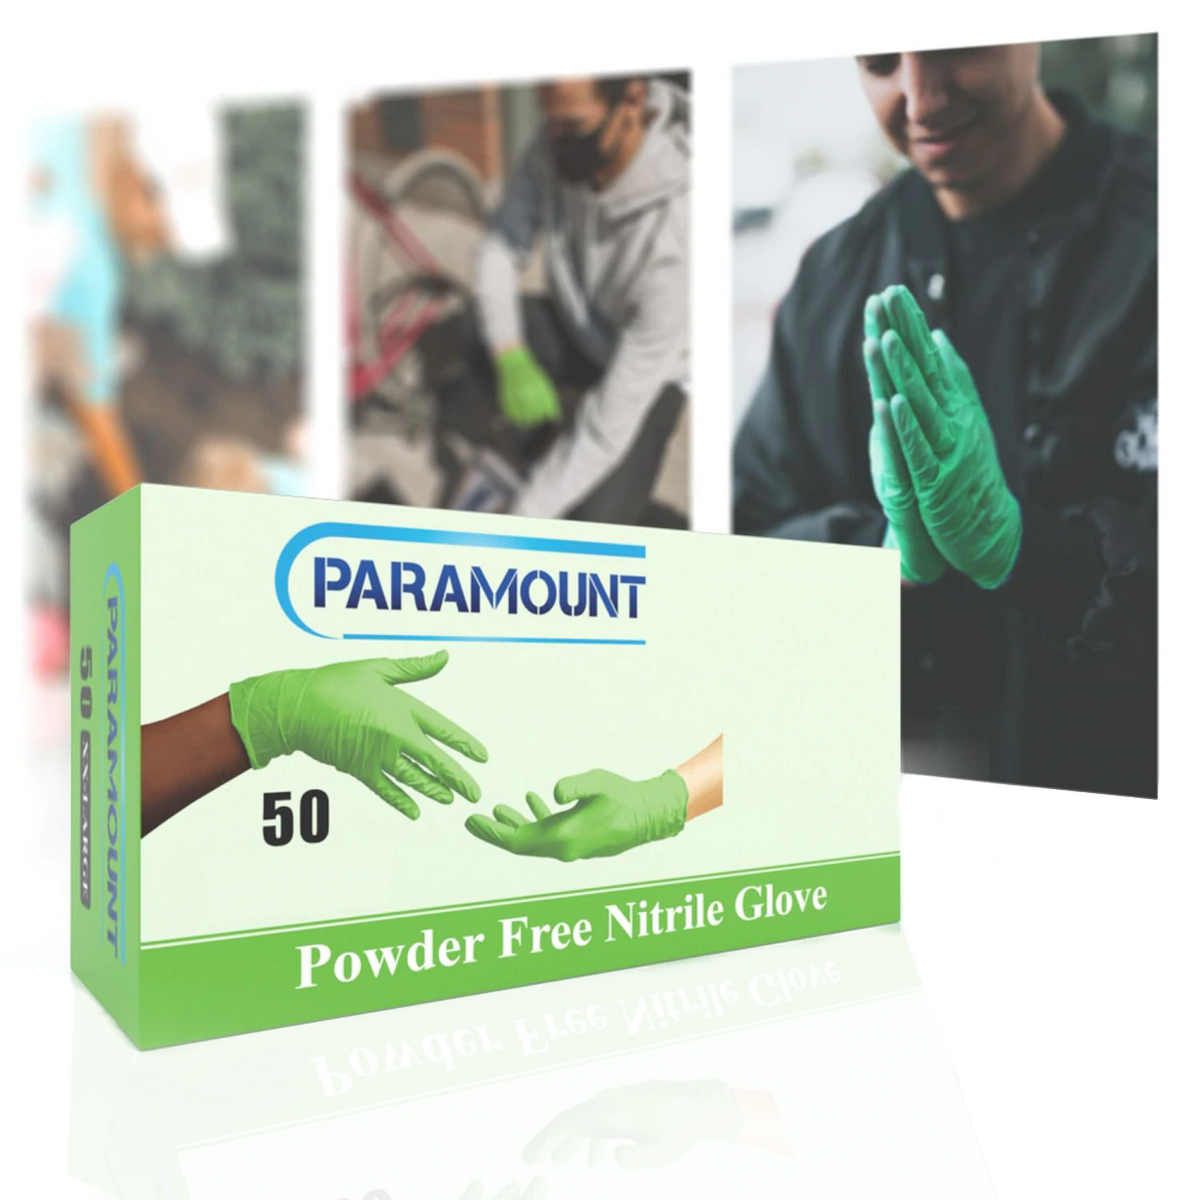 3 boxes of green Paramount, Powder Free, Nitrile Glove, when worn in the hands